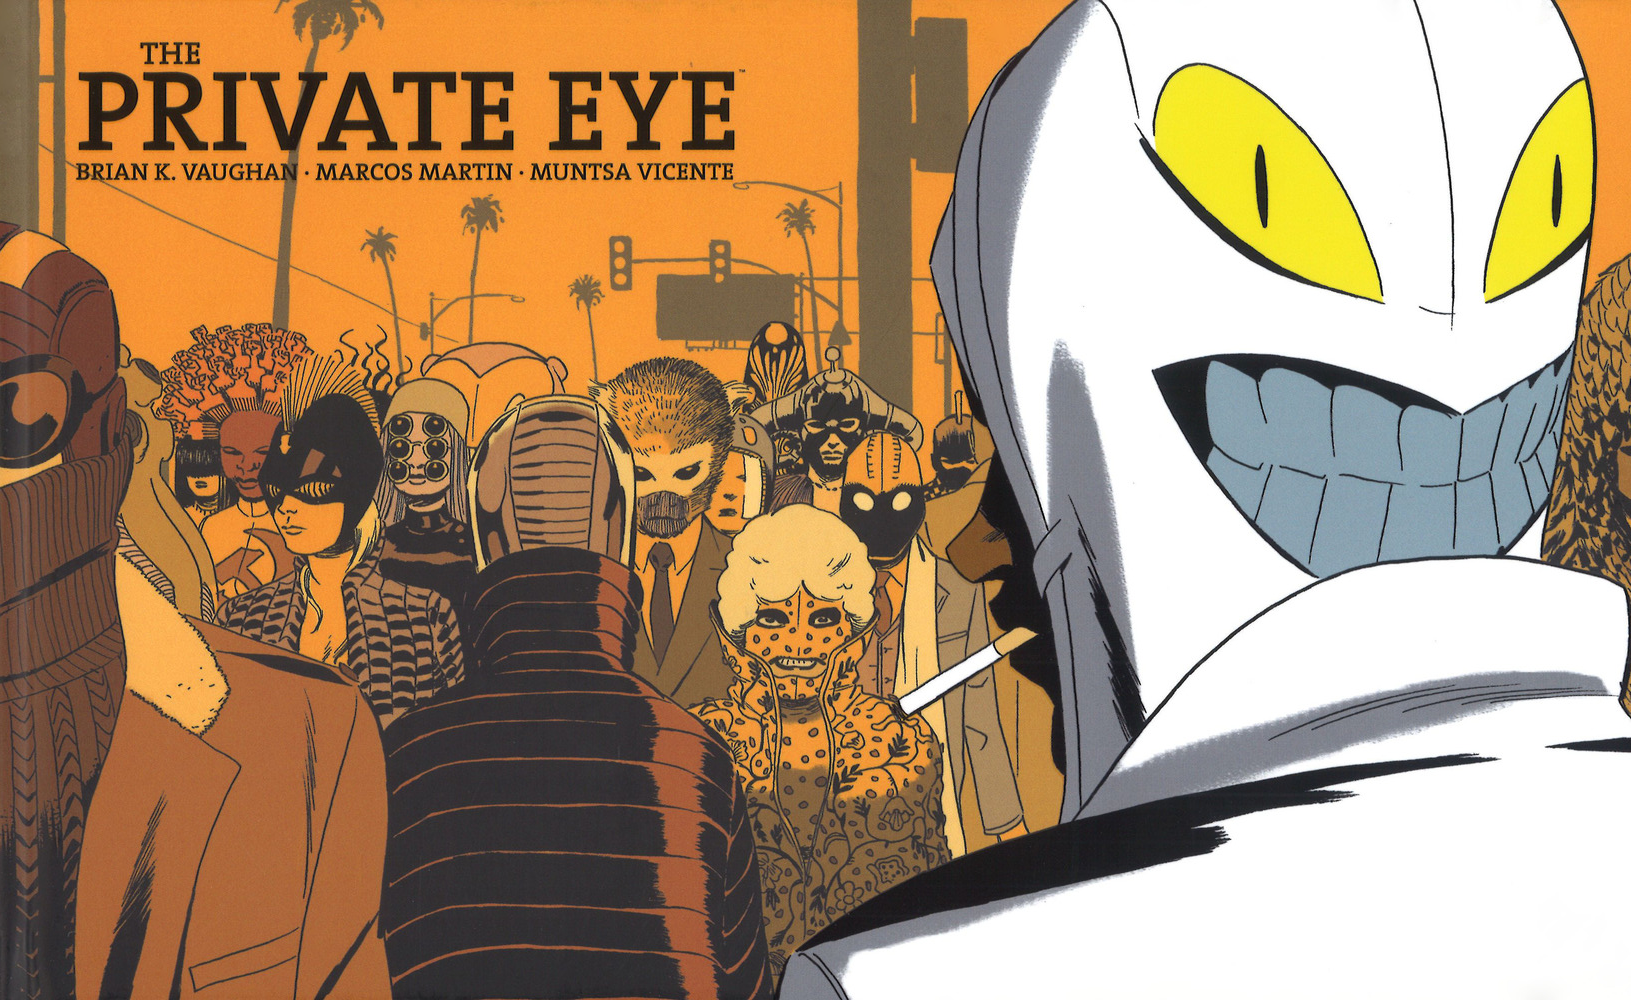 Brian K. Vaughan / Marcos Martin - The Private Eye